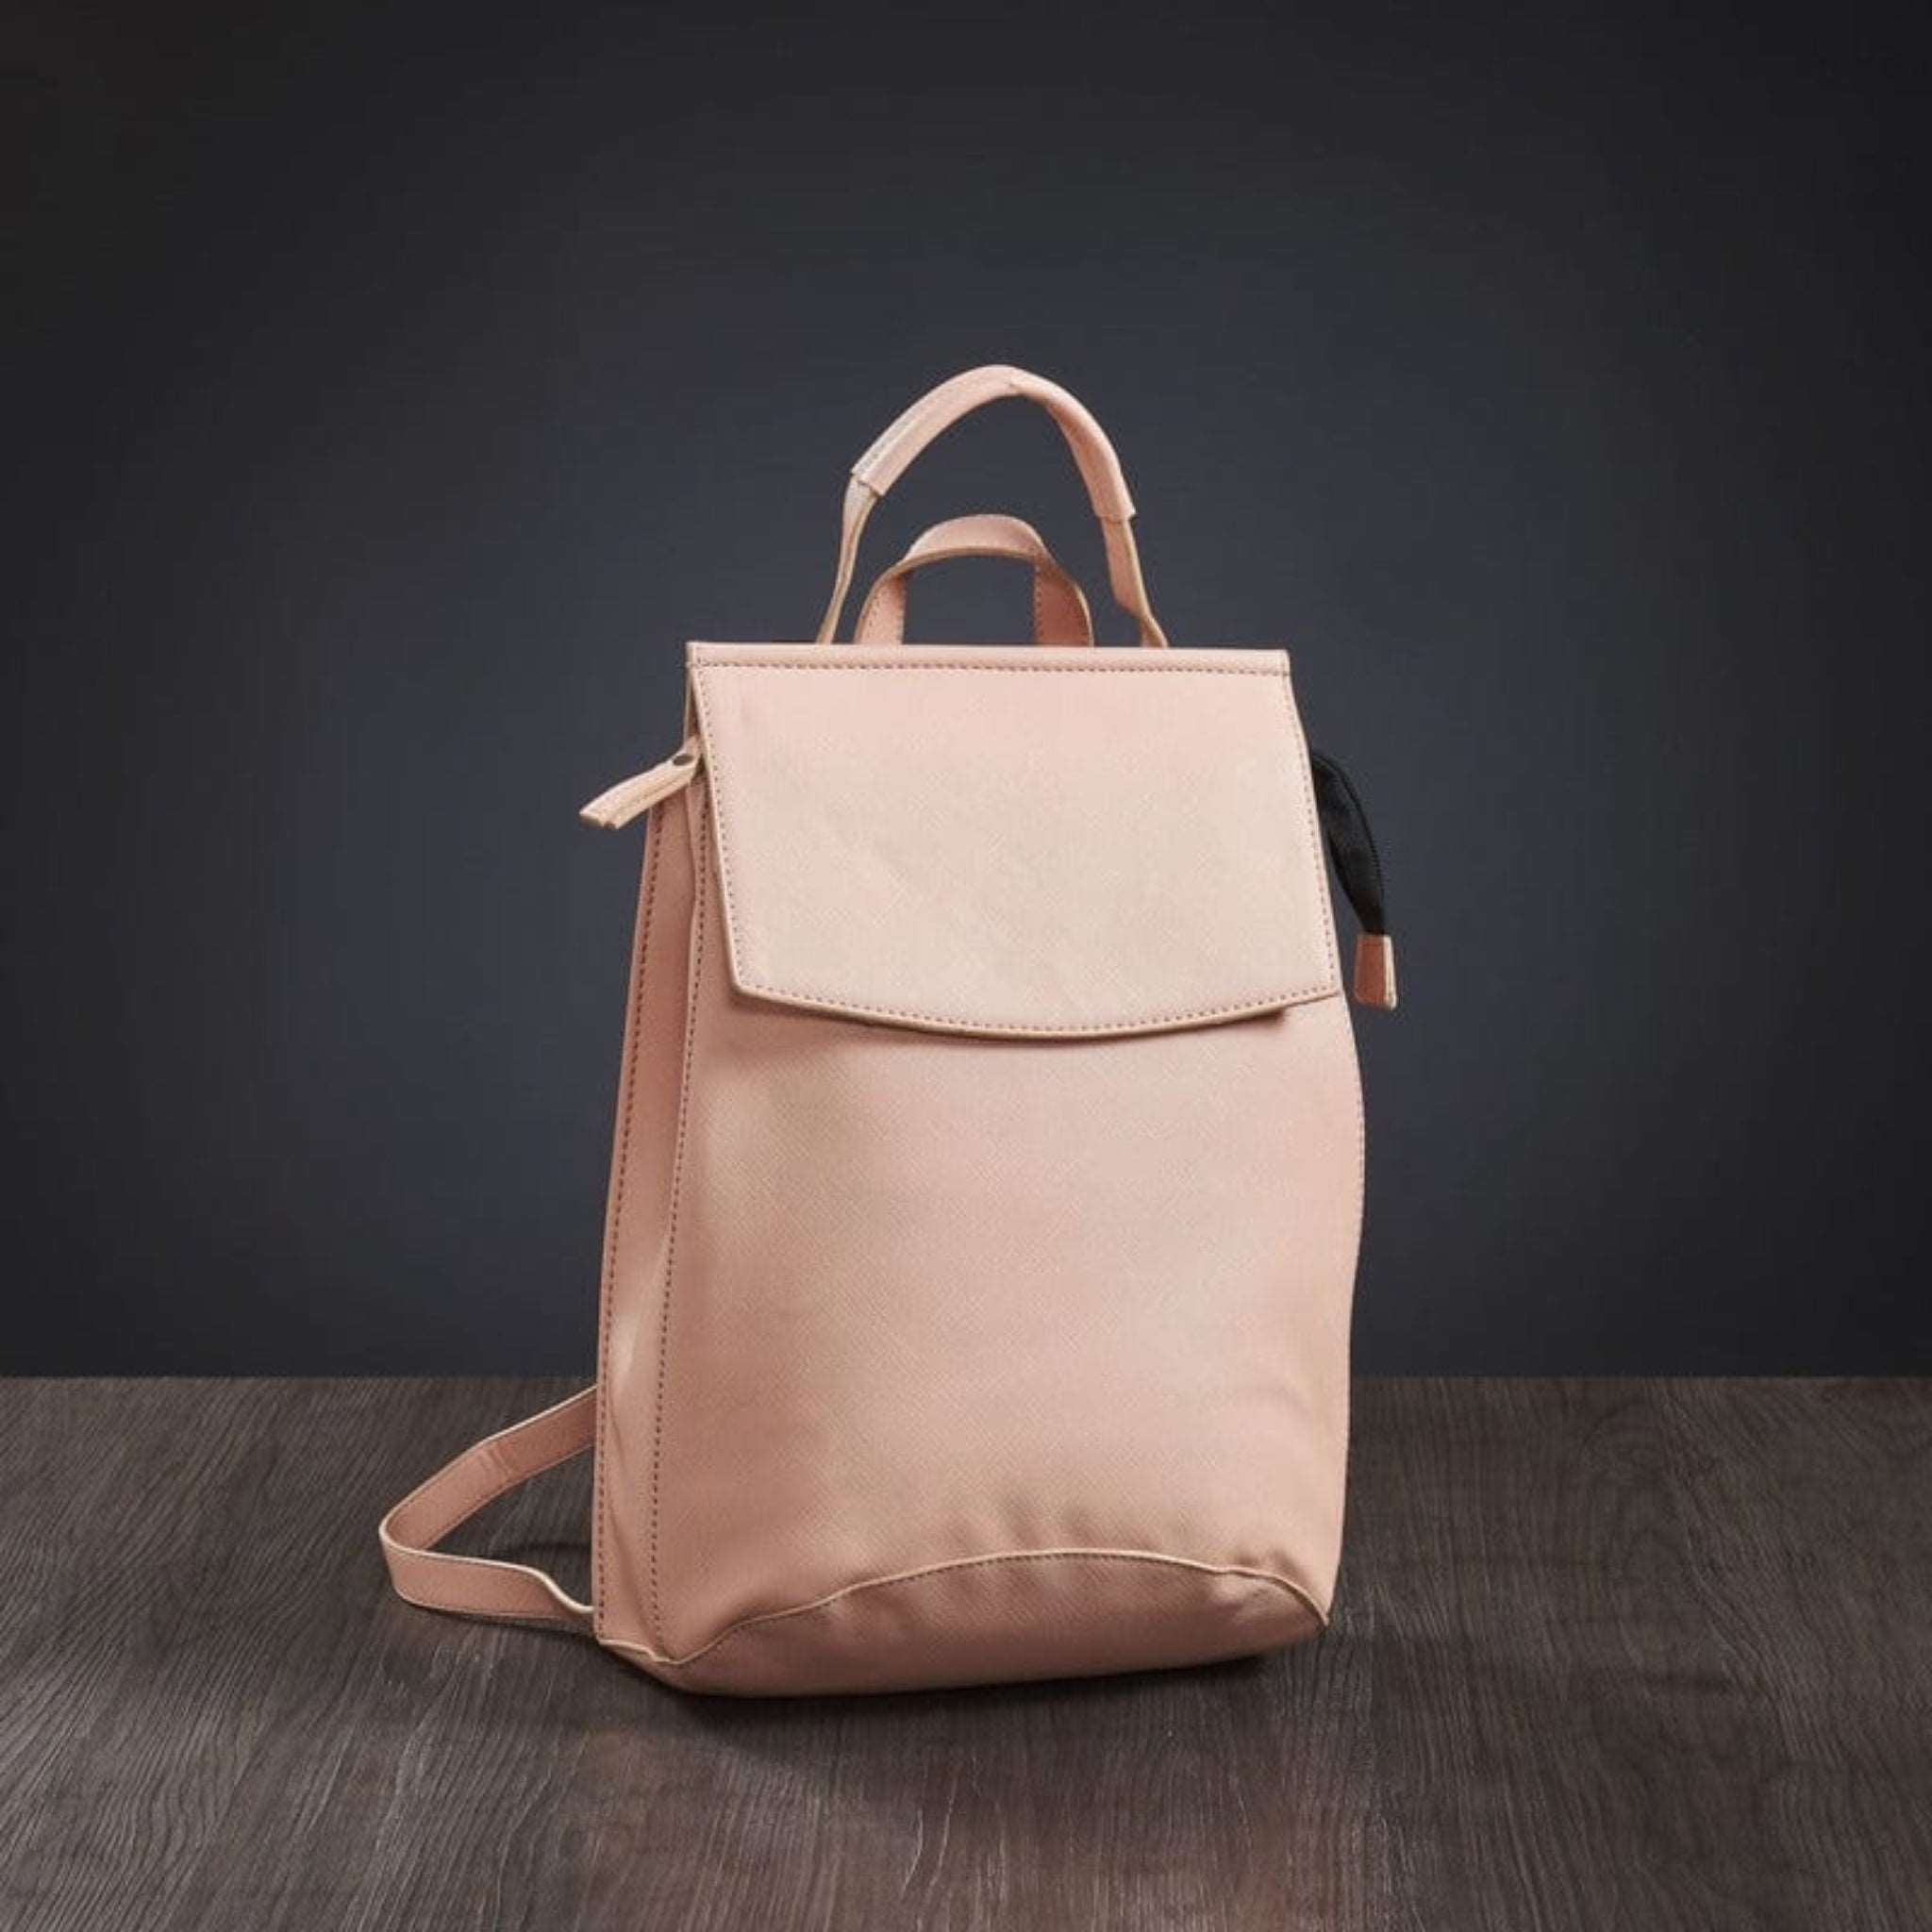 Mona B Convertible Backpack for Offices Schools and Colleges with Stylish Design for Women (Coral)